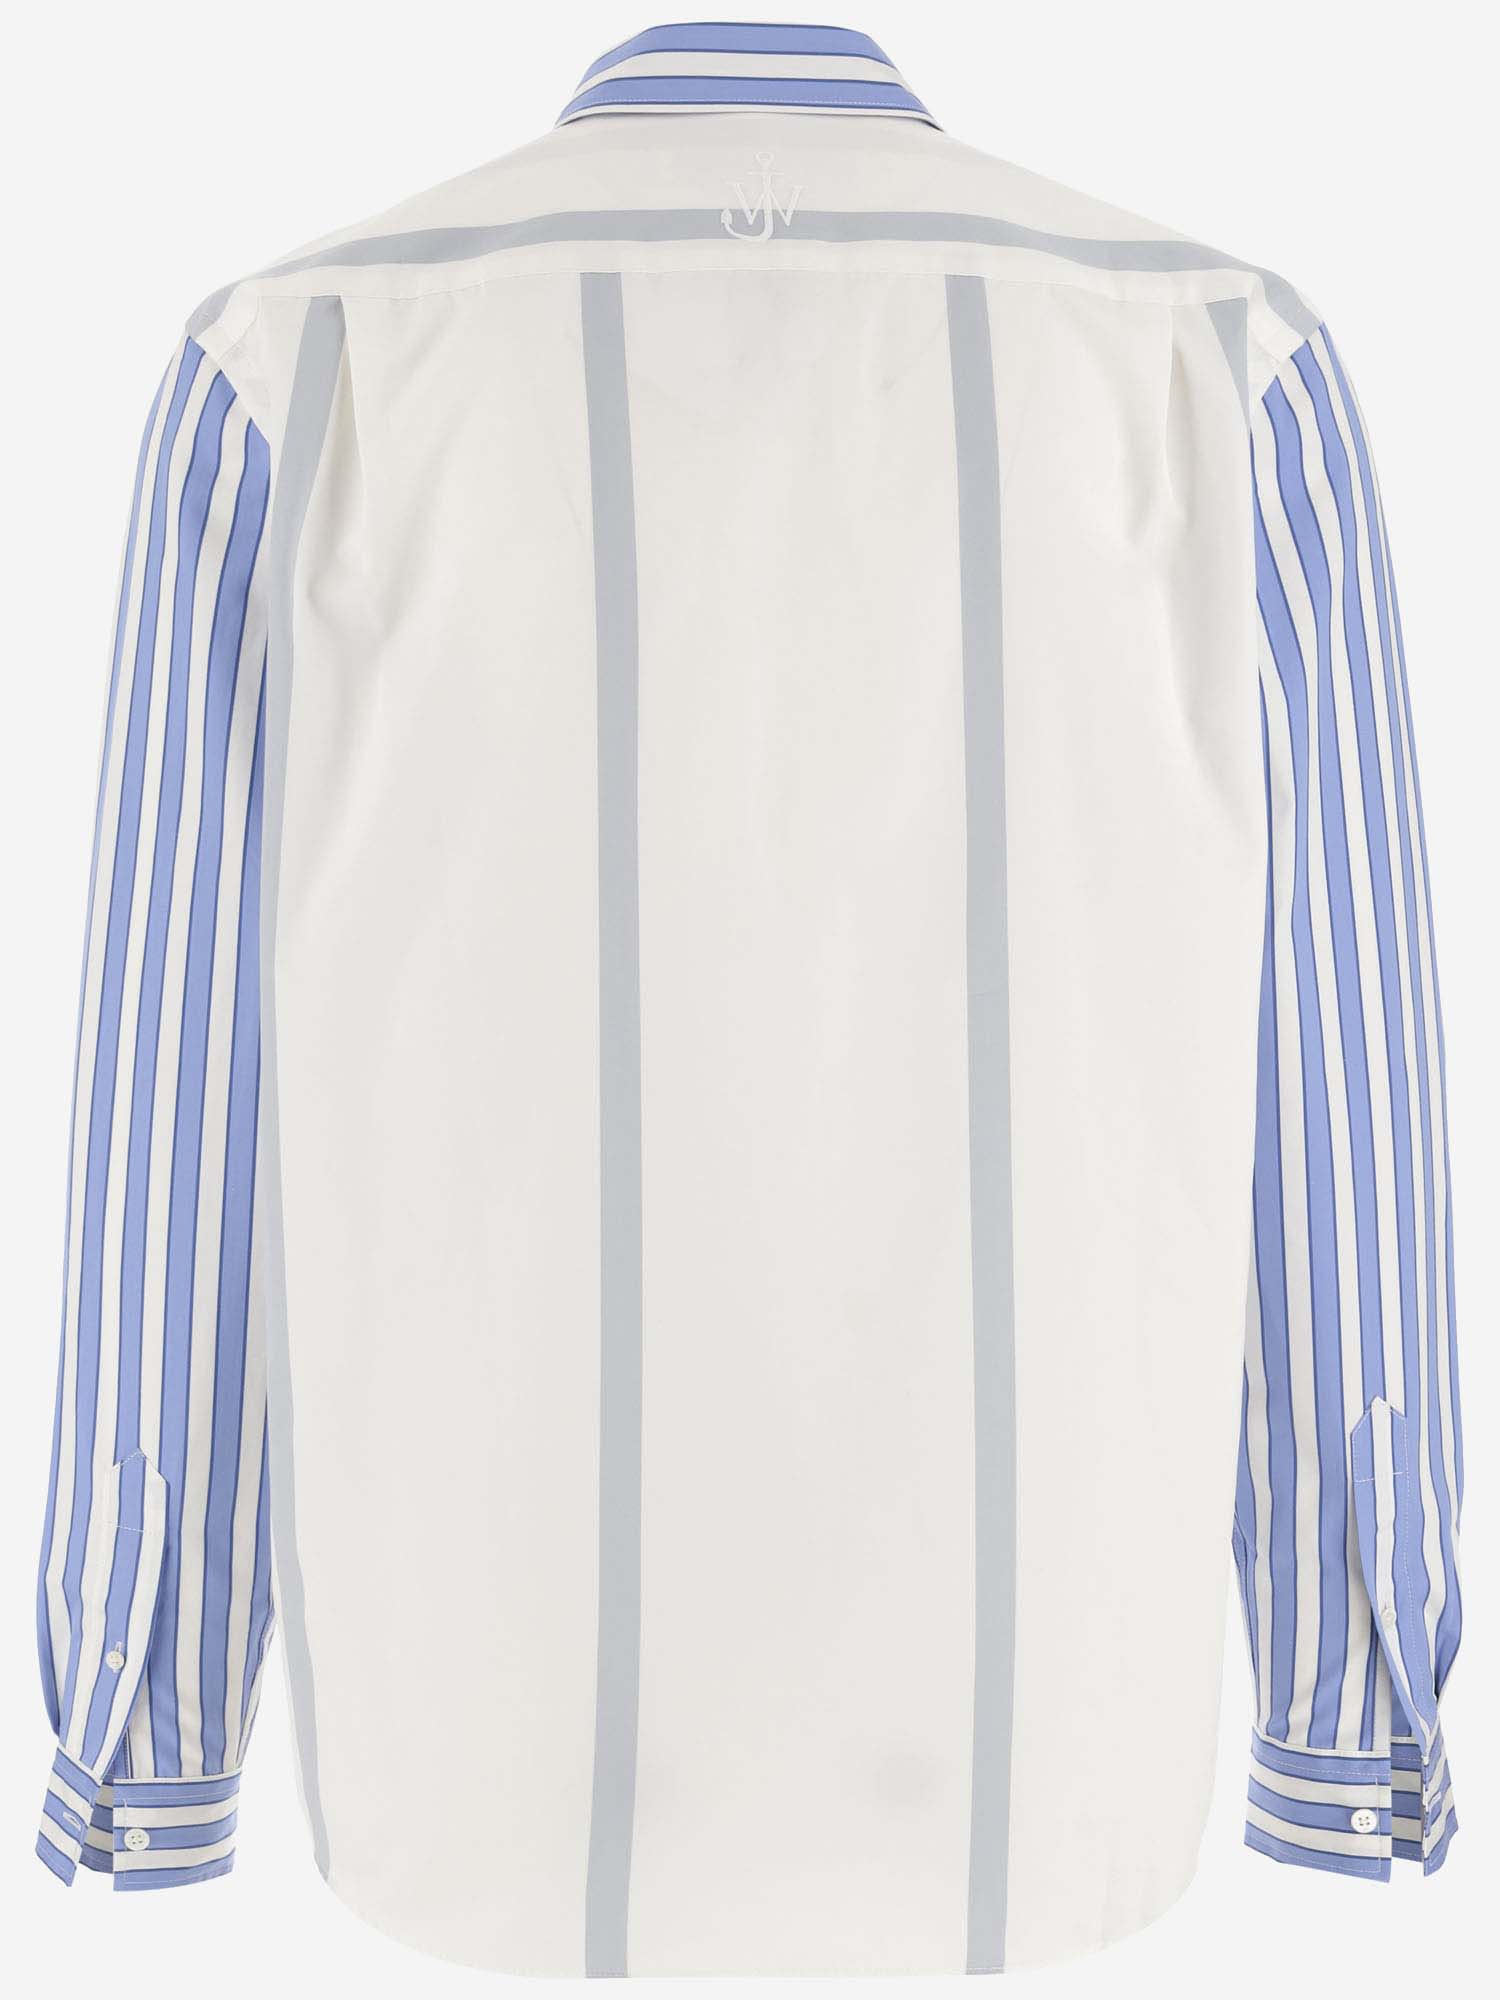 Shop Jw Anderson Striped Cotton Shirt In Blue/white